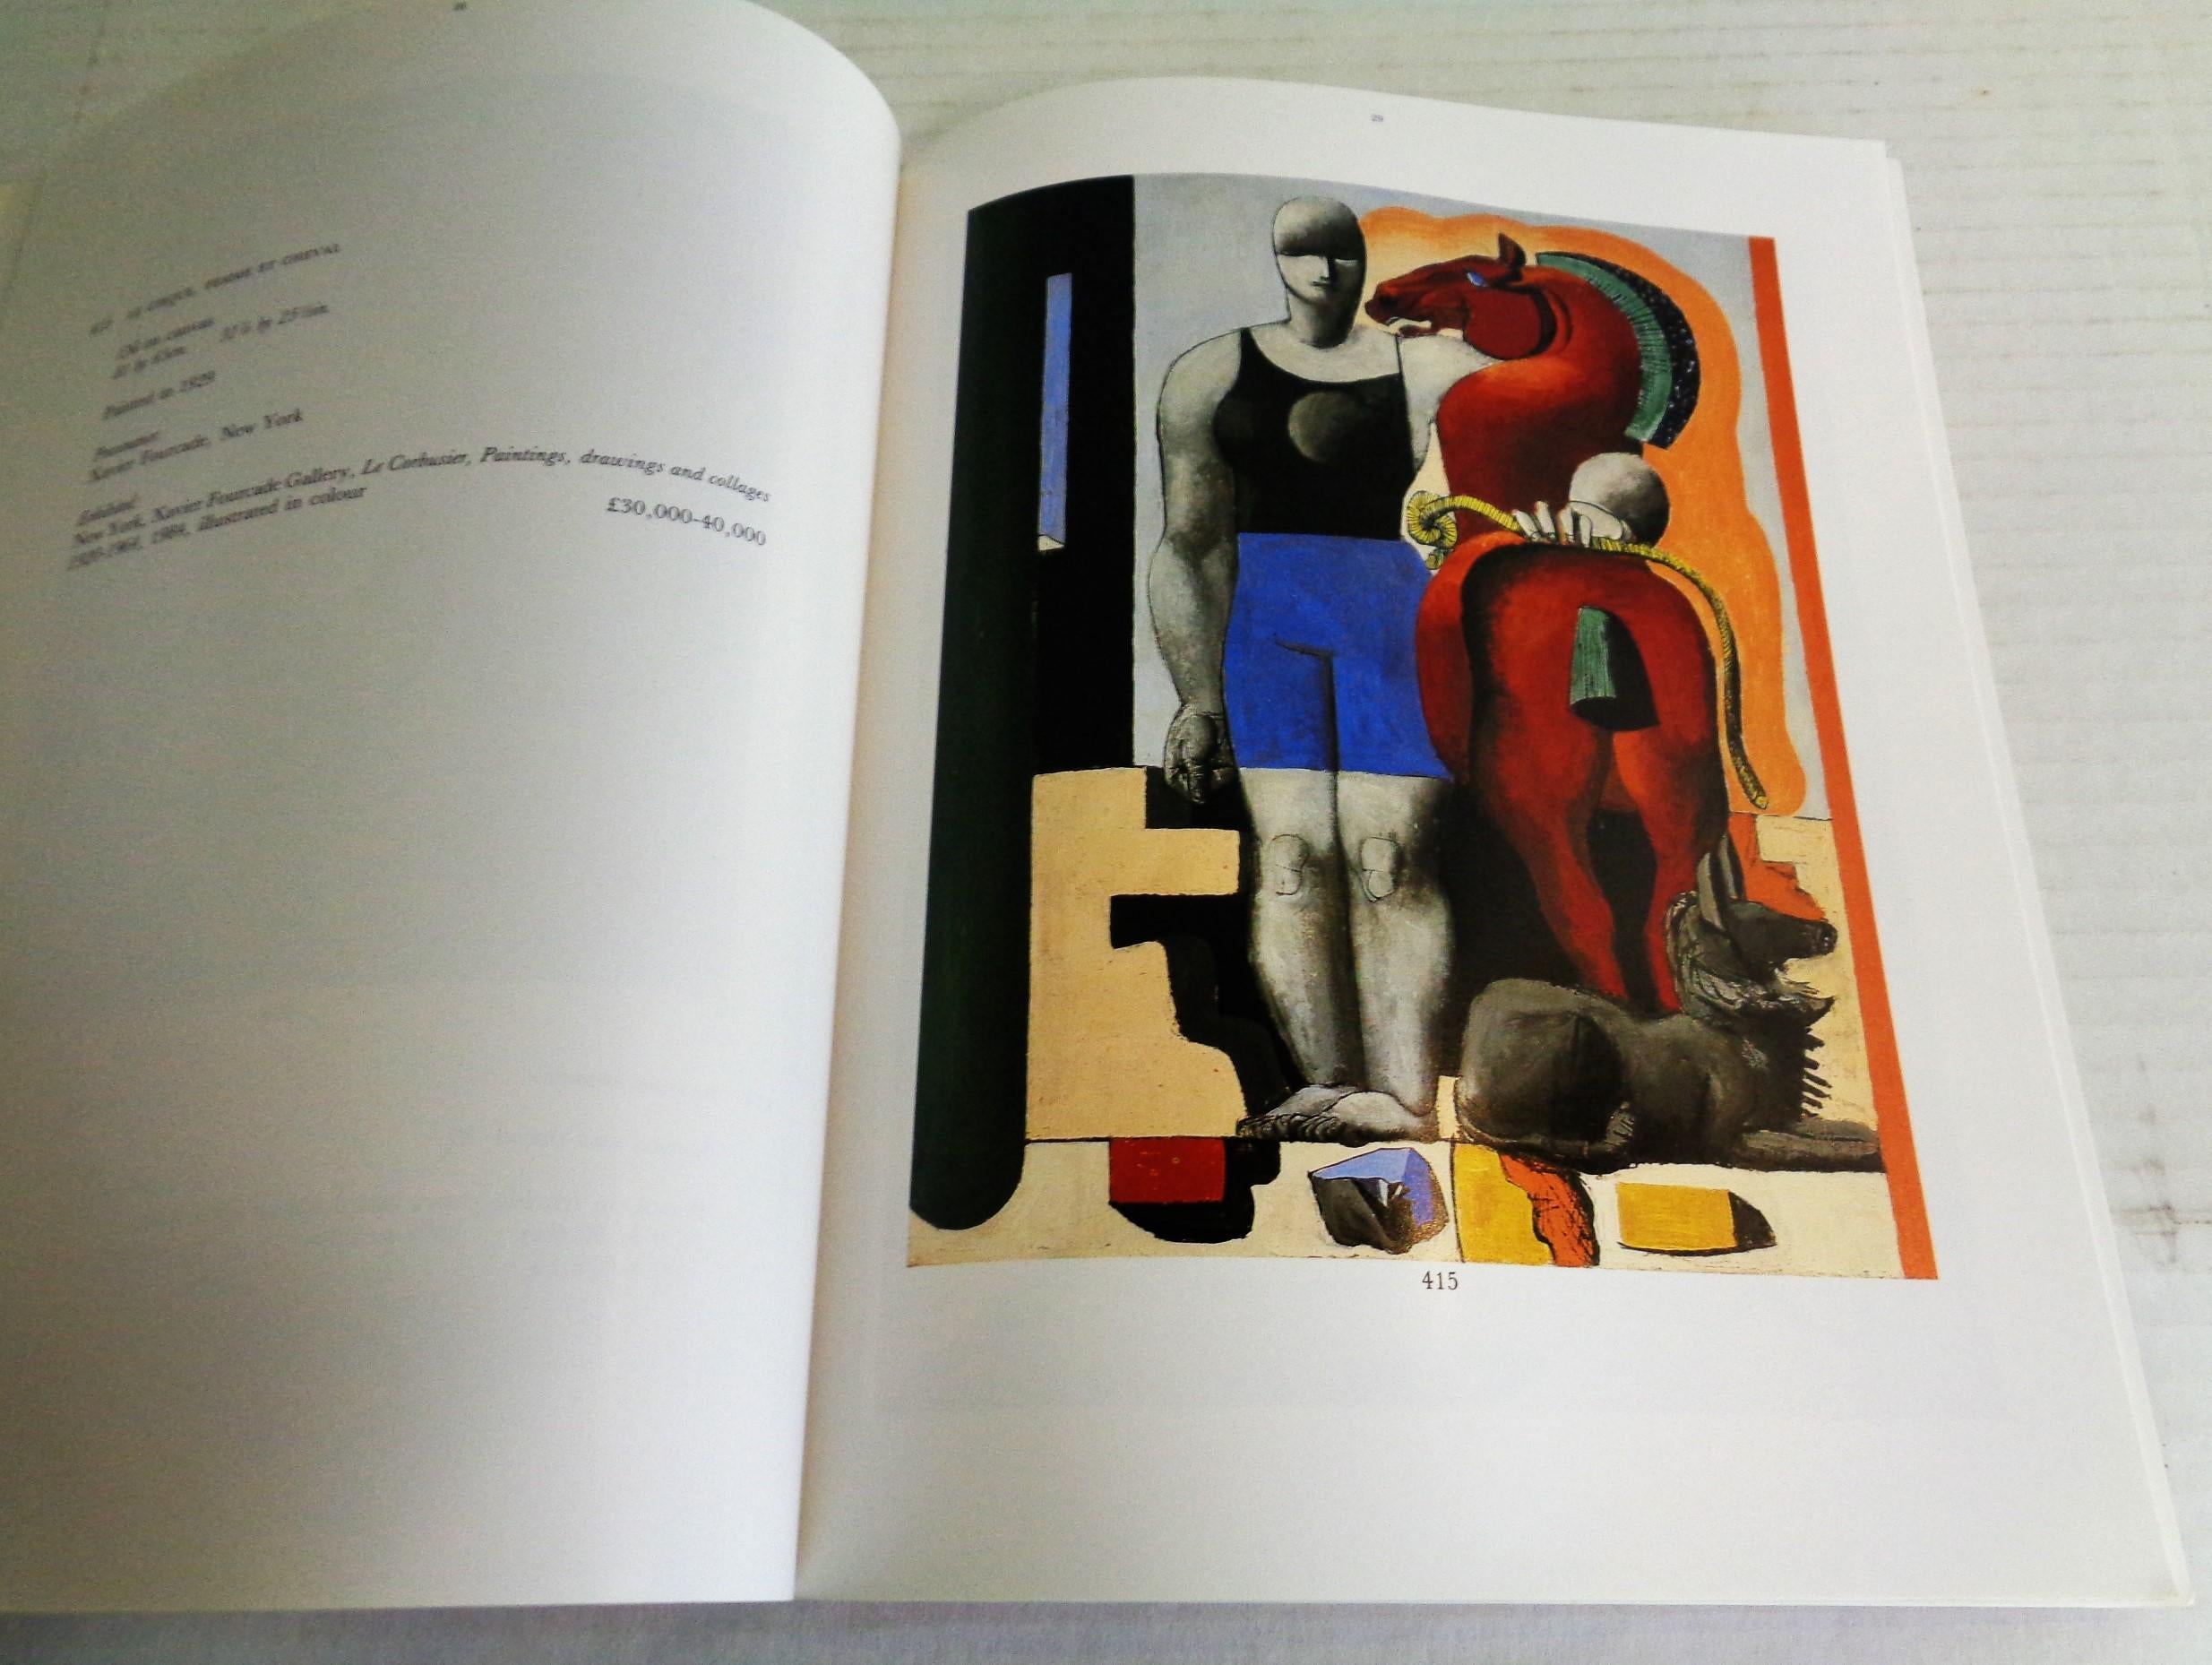 Thirty-Five Works by Le Corbusier: 1987 Sotheby's, London - Auction Catalog For Sale 2